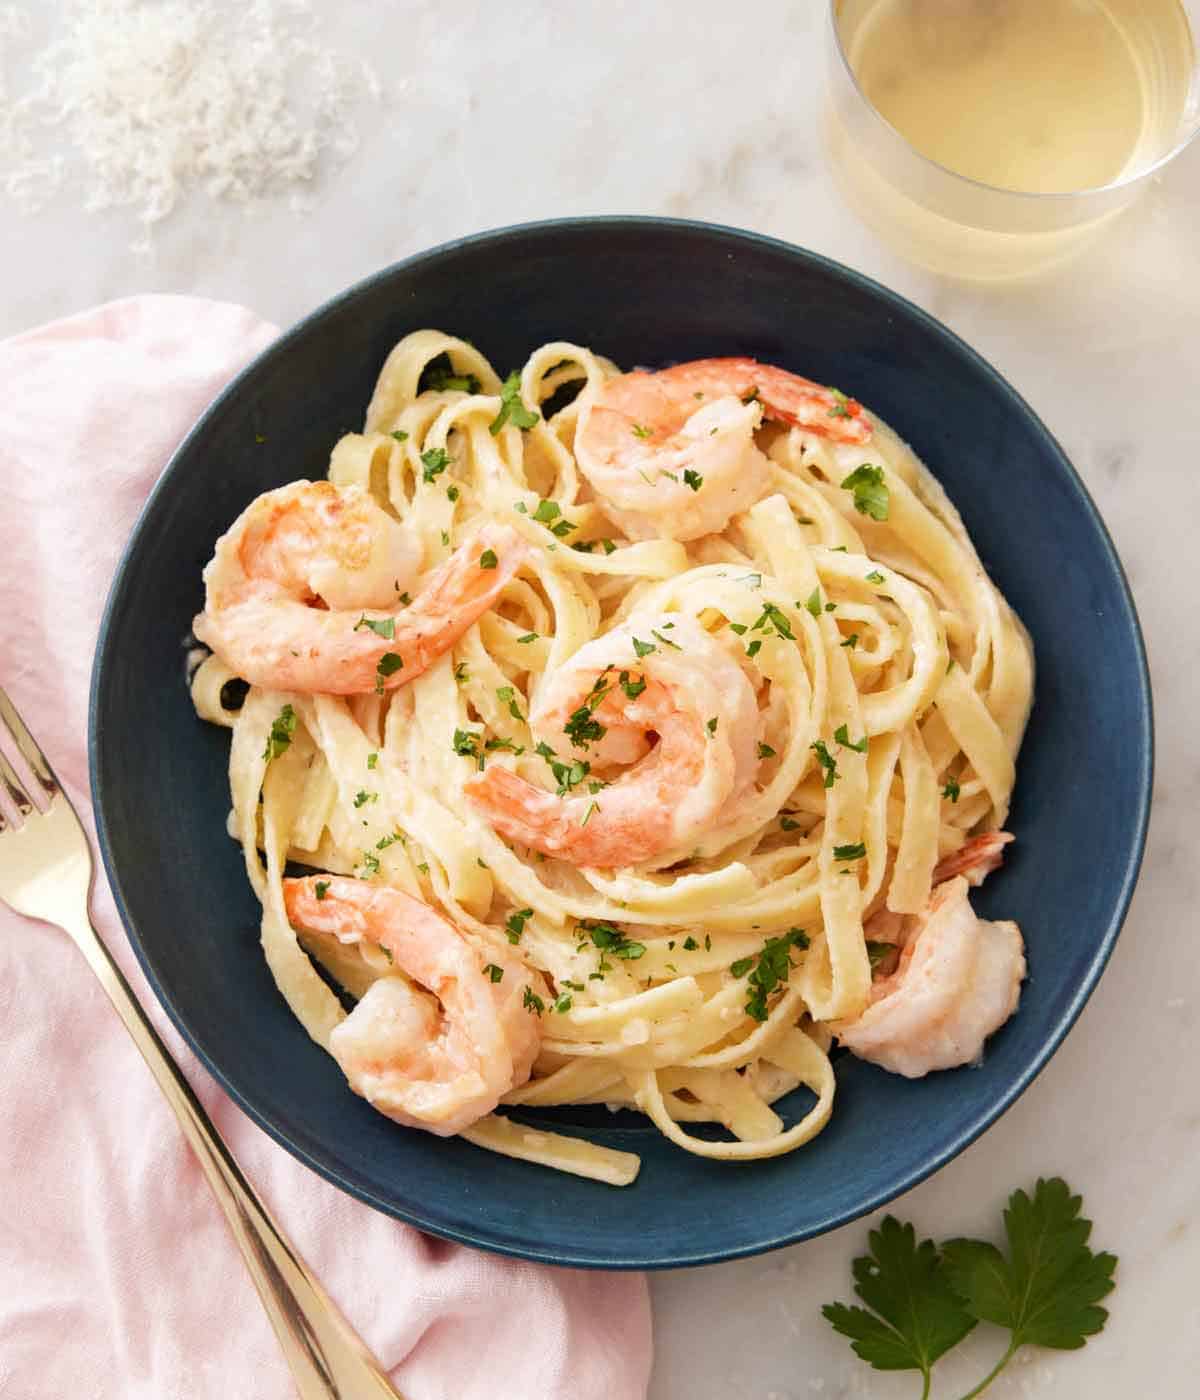 Overhead view of a plate of shrimp Alfredo pasta with a fork and glass of wine beside it.